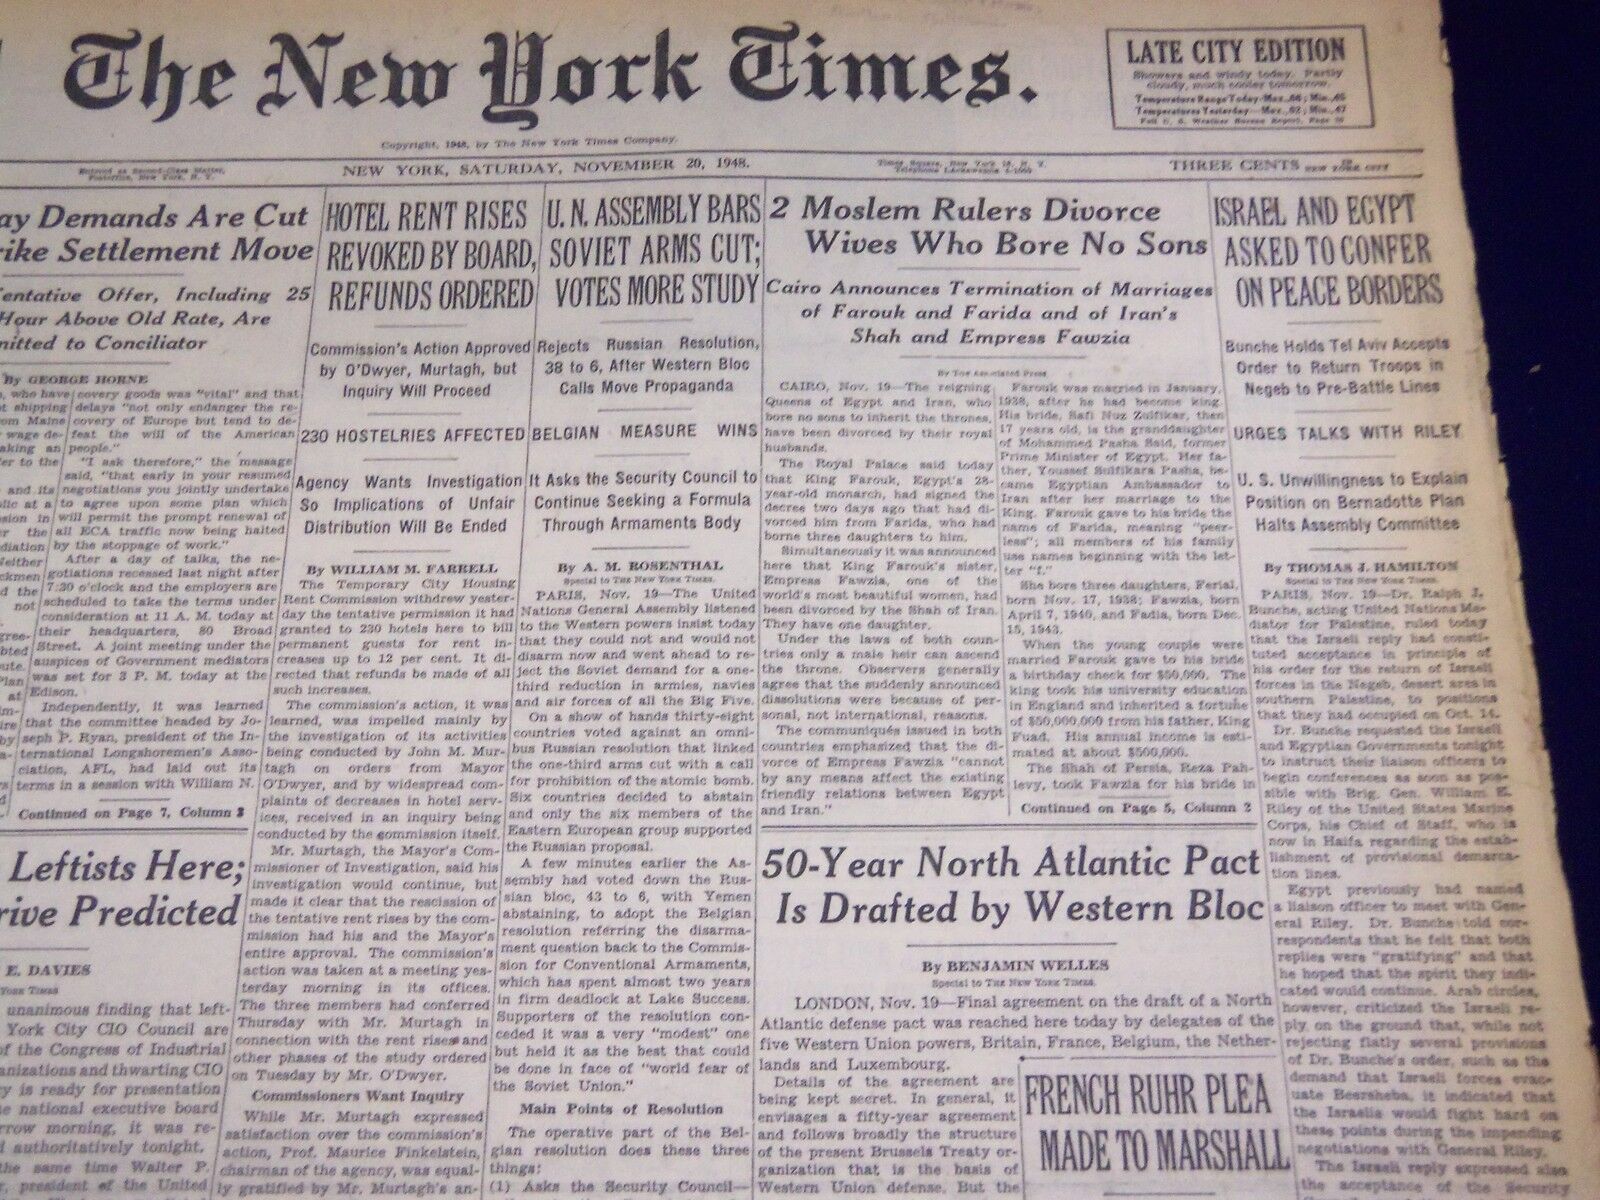 1948 NOVEMBER 20 NEW YORK TIMES - ISRAEL AND EGYPT CONFER - NT 2915